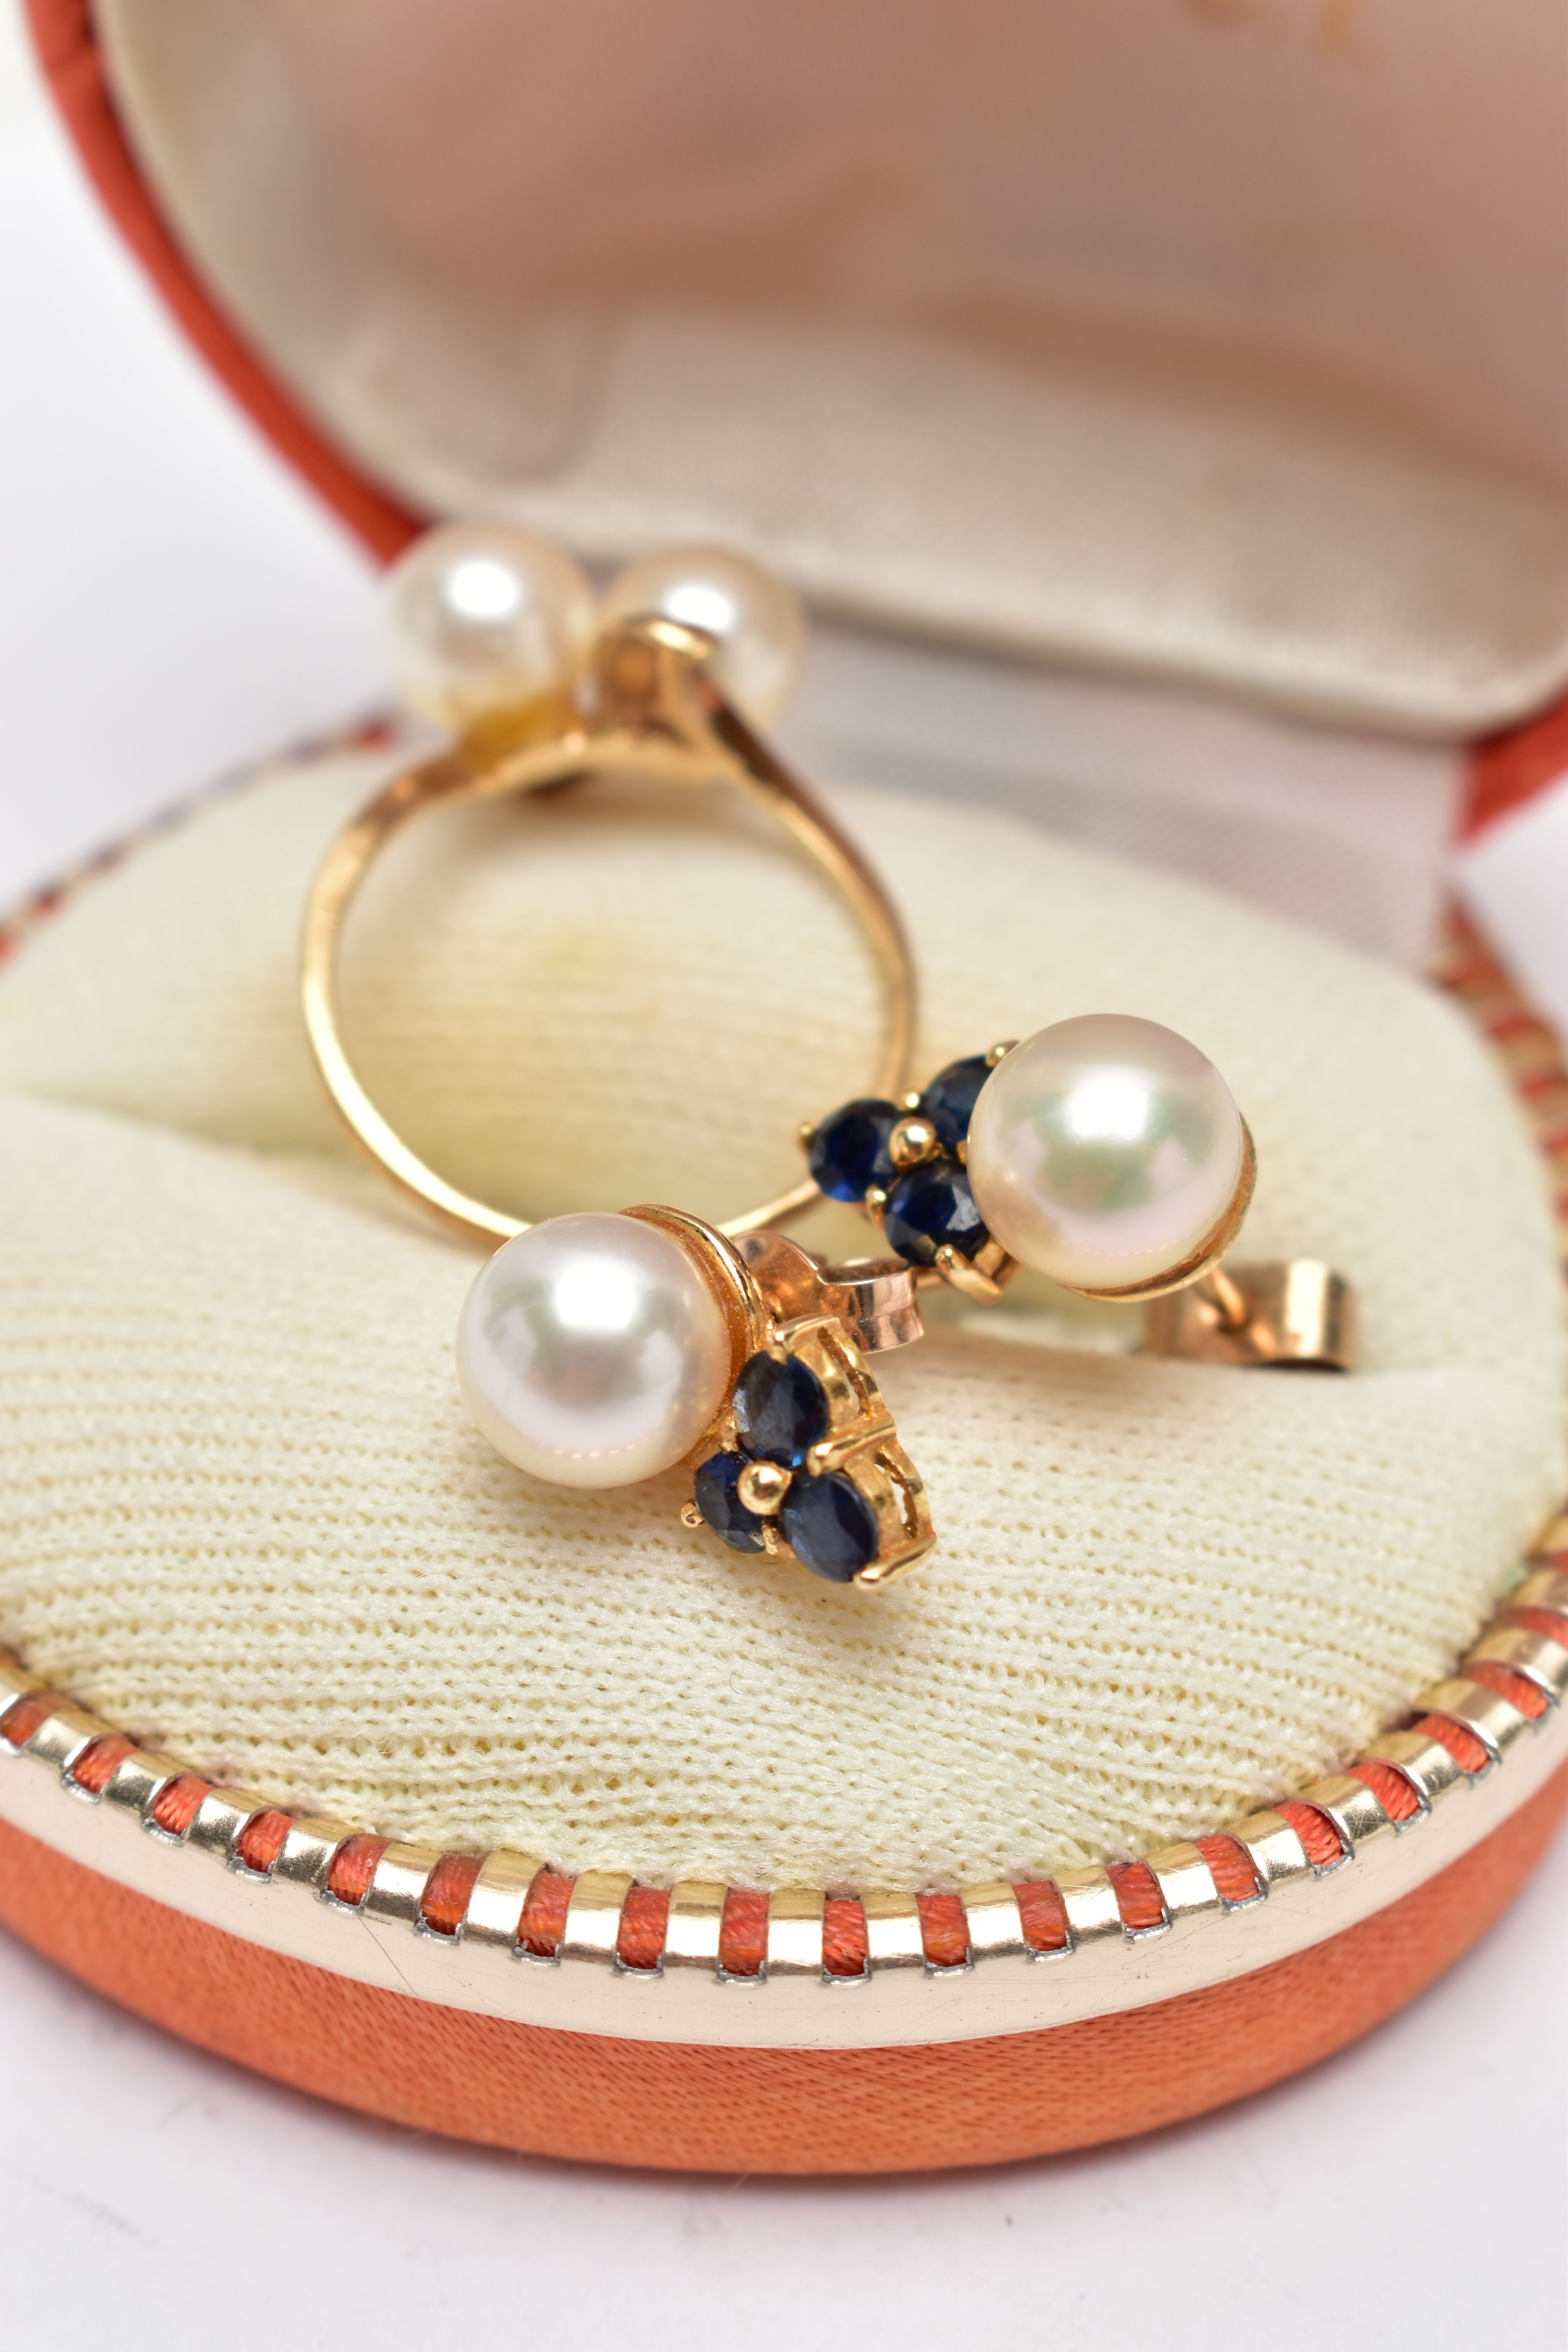 A 9CT GOLD PEARL RING AND PEARL EARRINGS, two cultured pearls set upon a thin yellow gold band, - Image 3 of 3